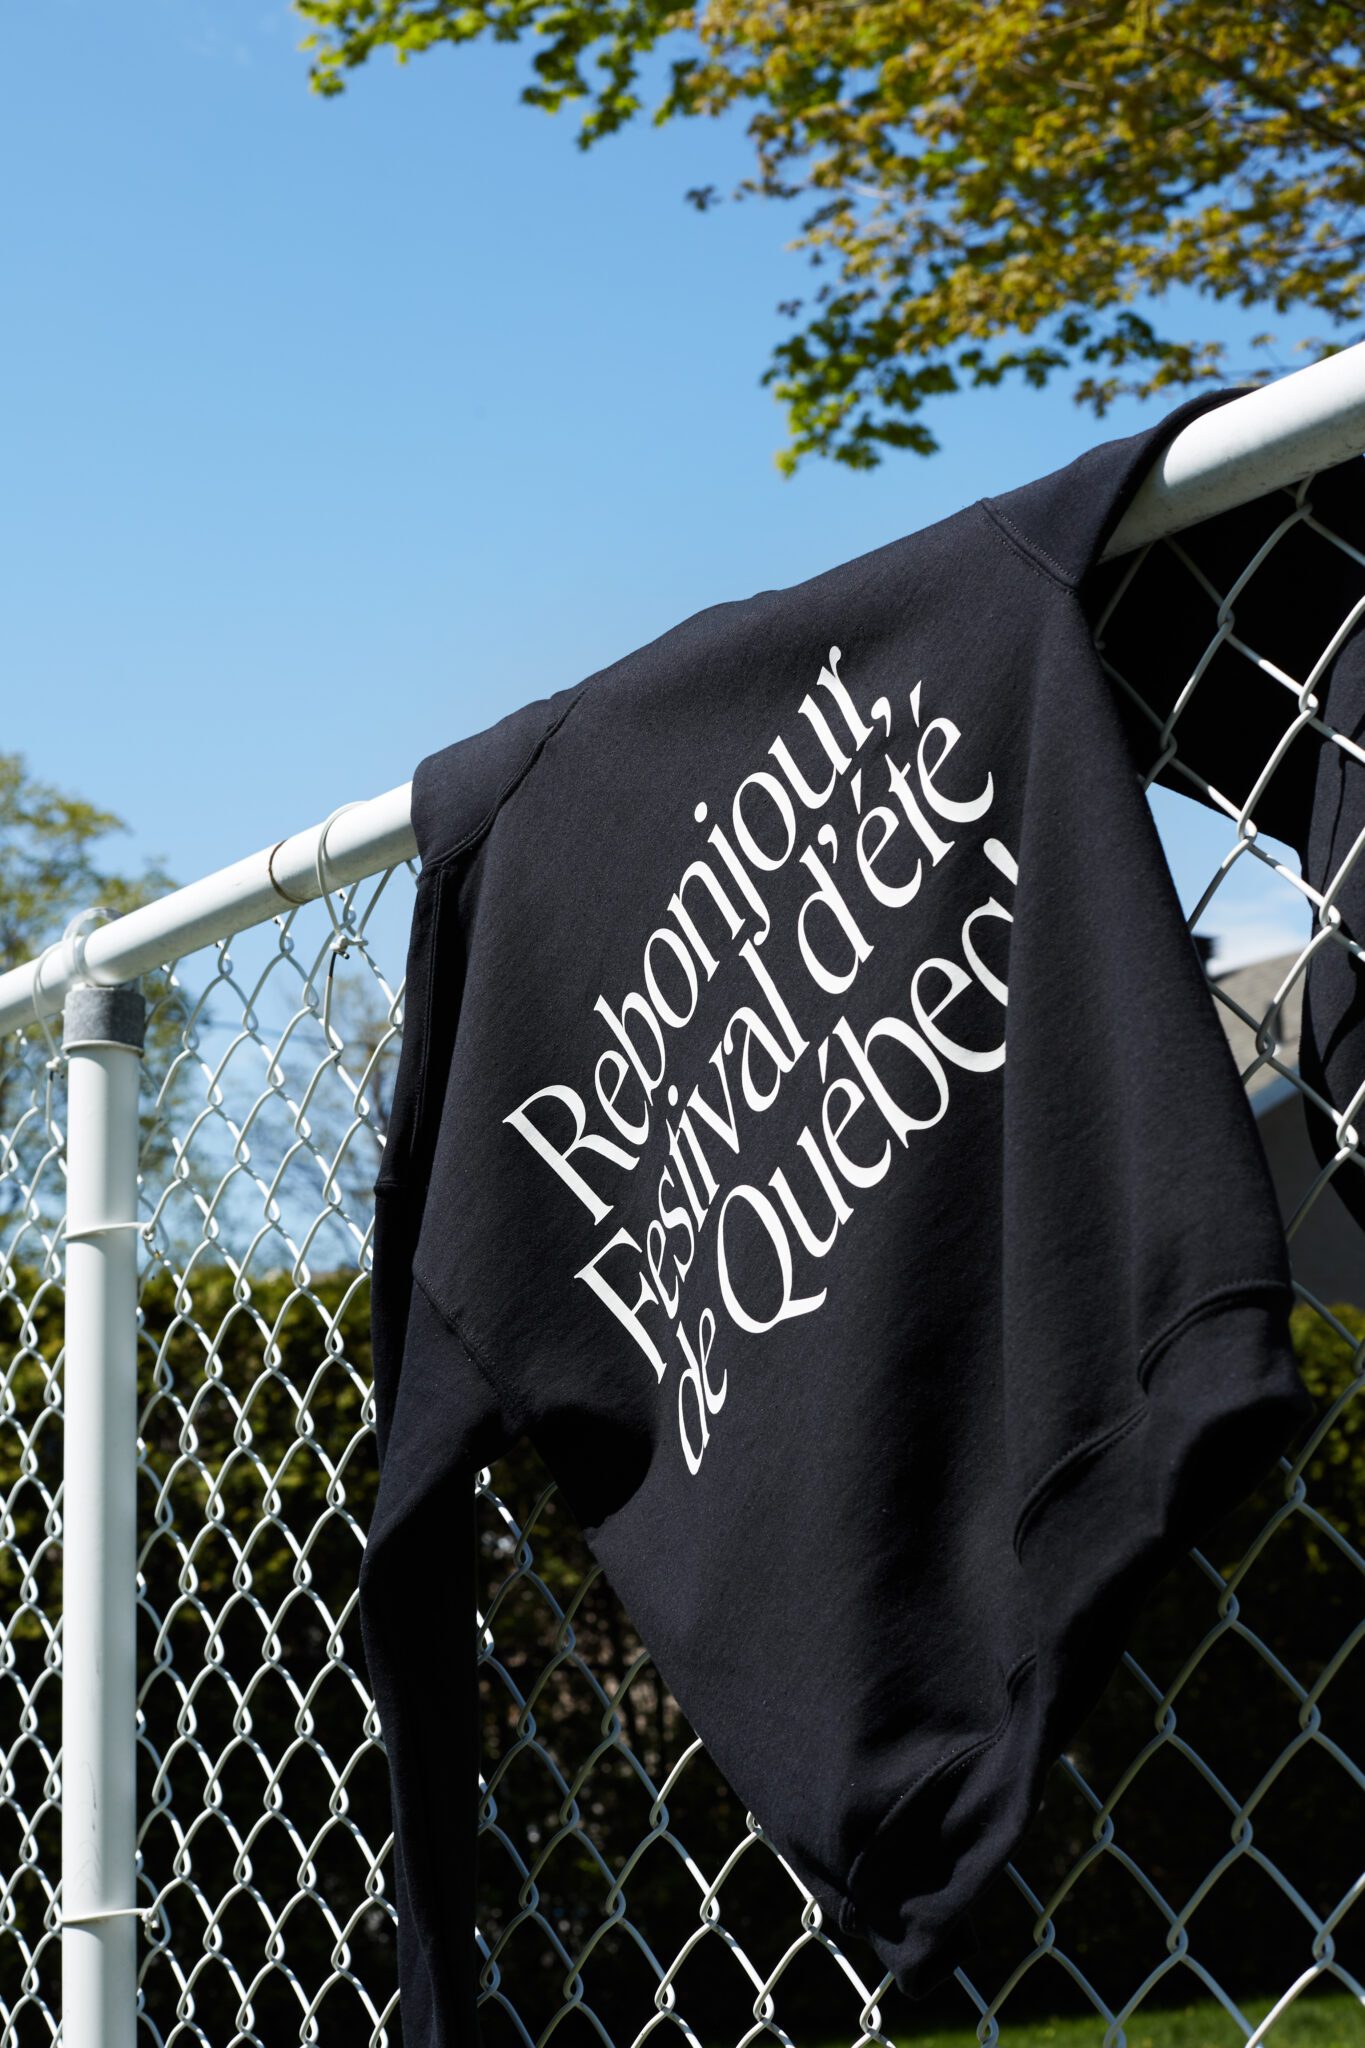 FEQ black sweater hanging on a fence. The sweater says Rebonjour on it.